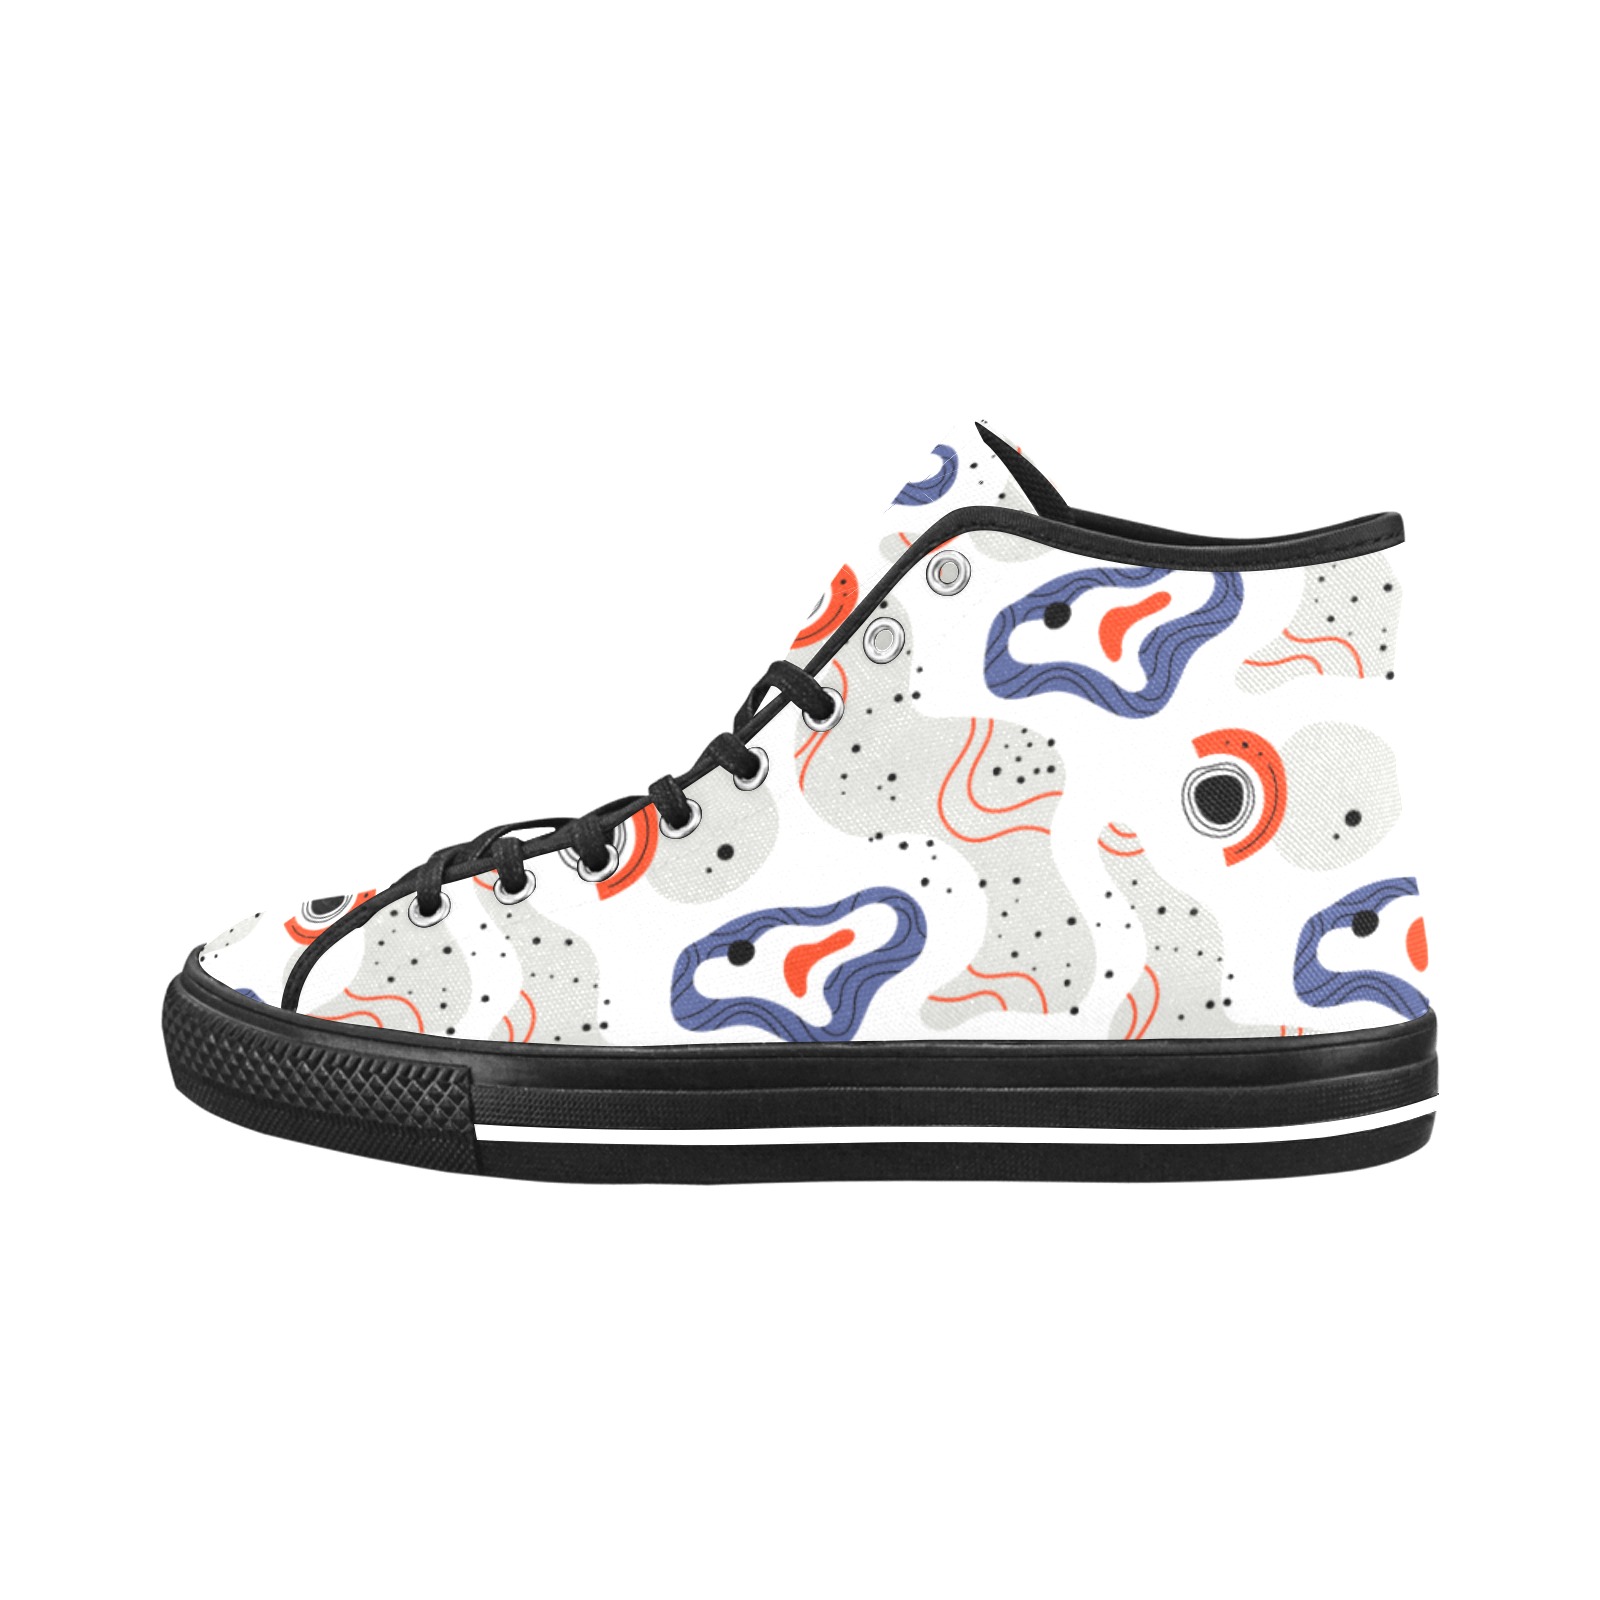 Elegant Abstract Mid Century Pattern Vancouver H Men's Canvas Shoes (1013-1)